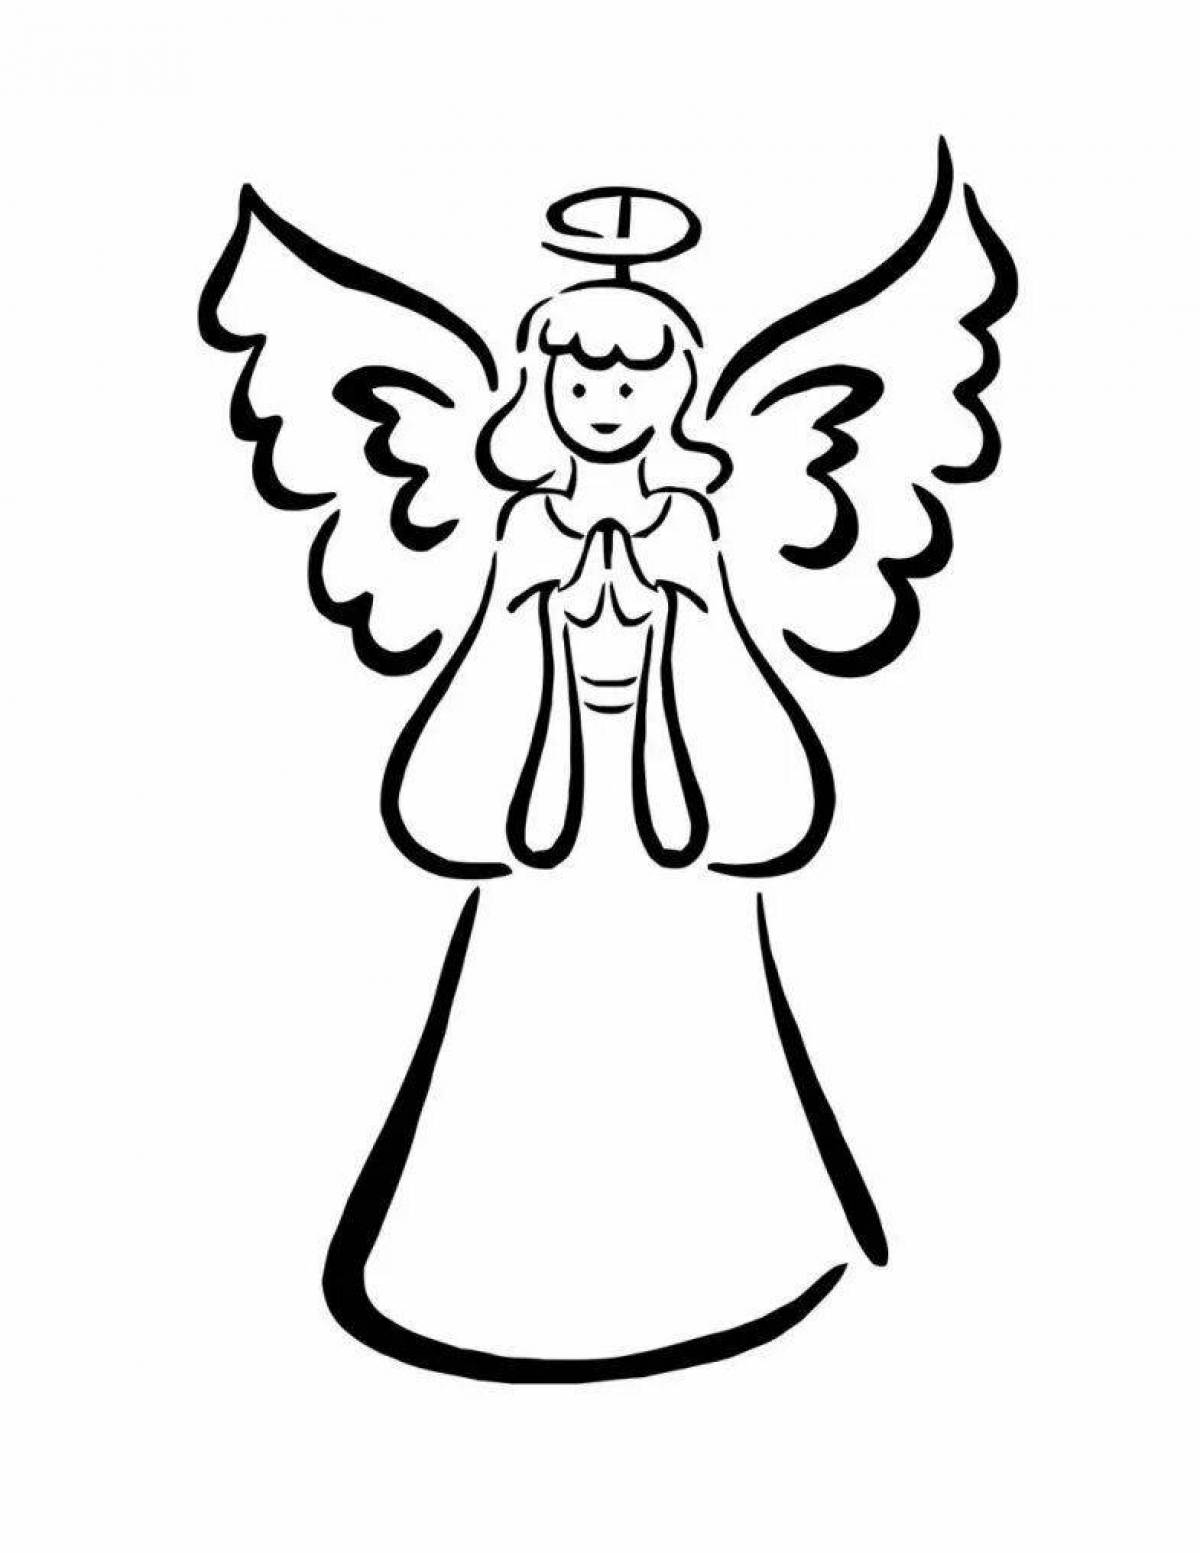 Exquisite angel coloring book for kids